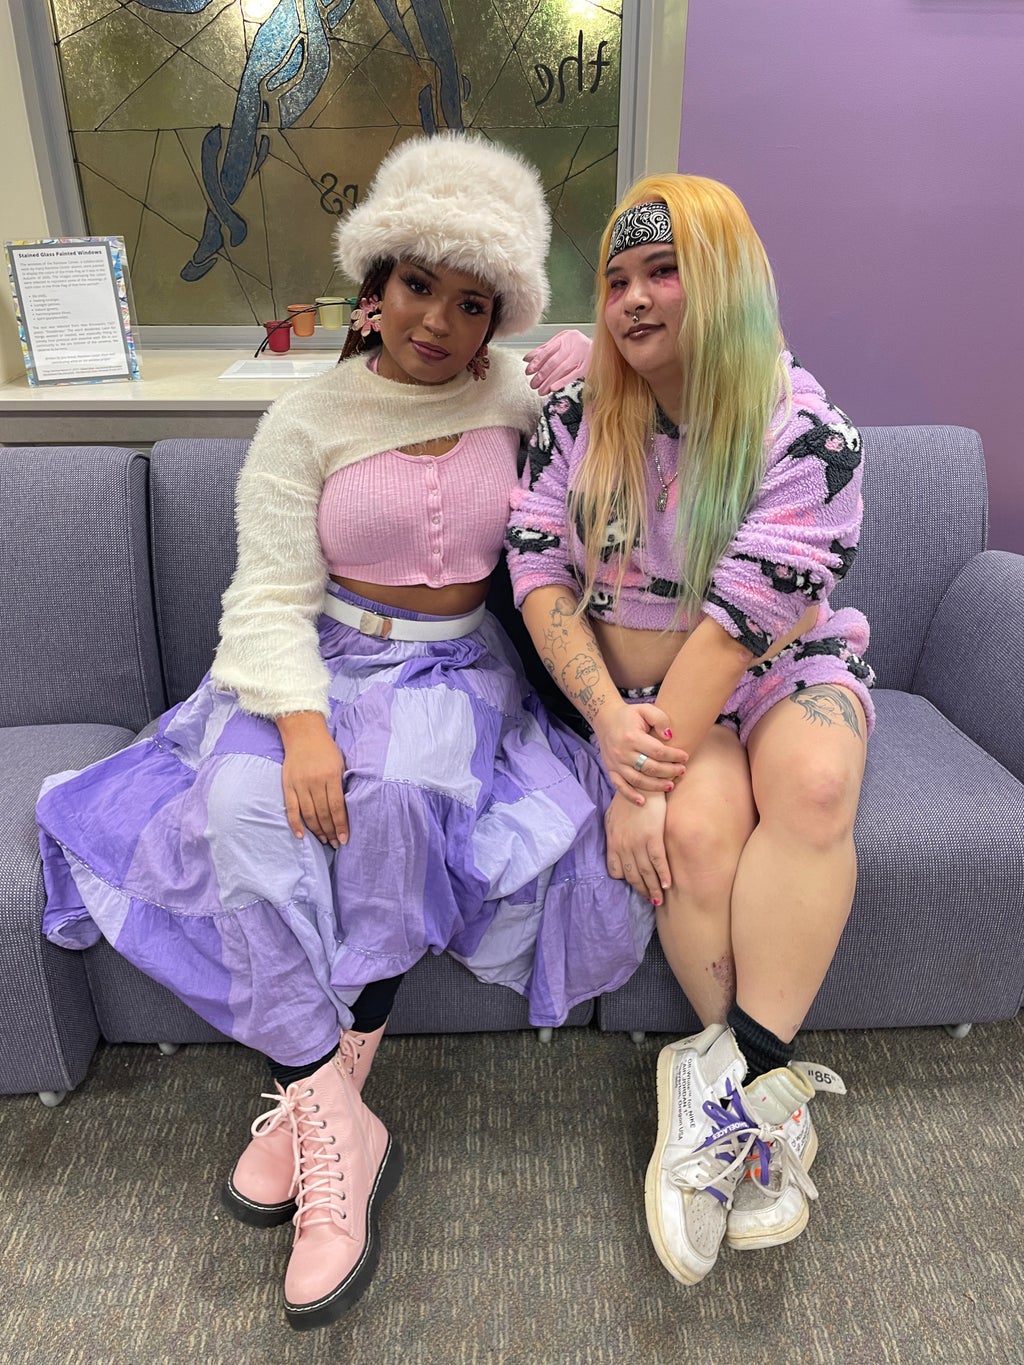 two student drag performers